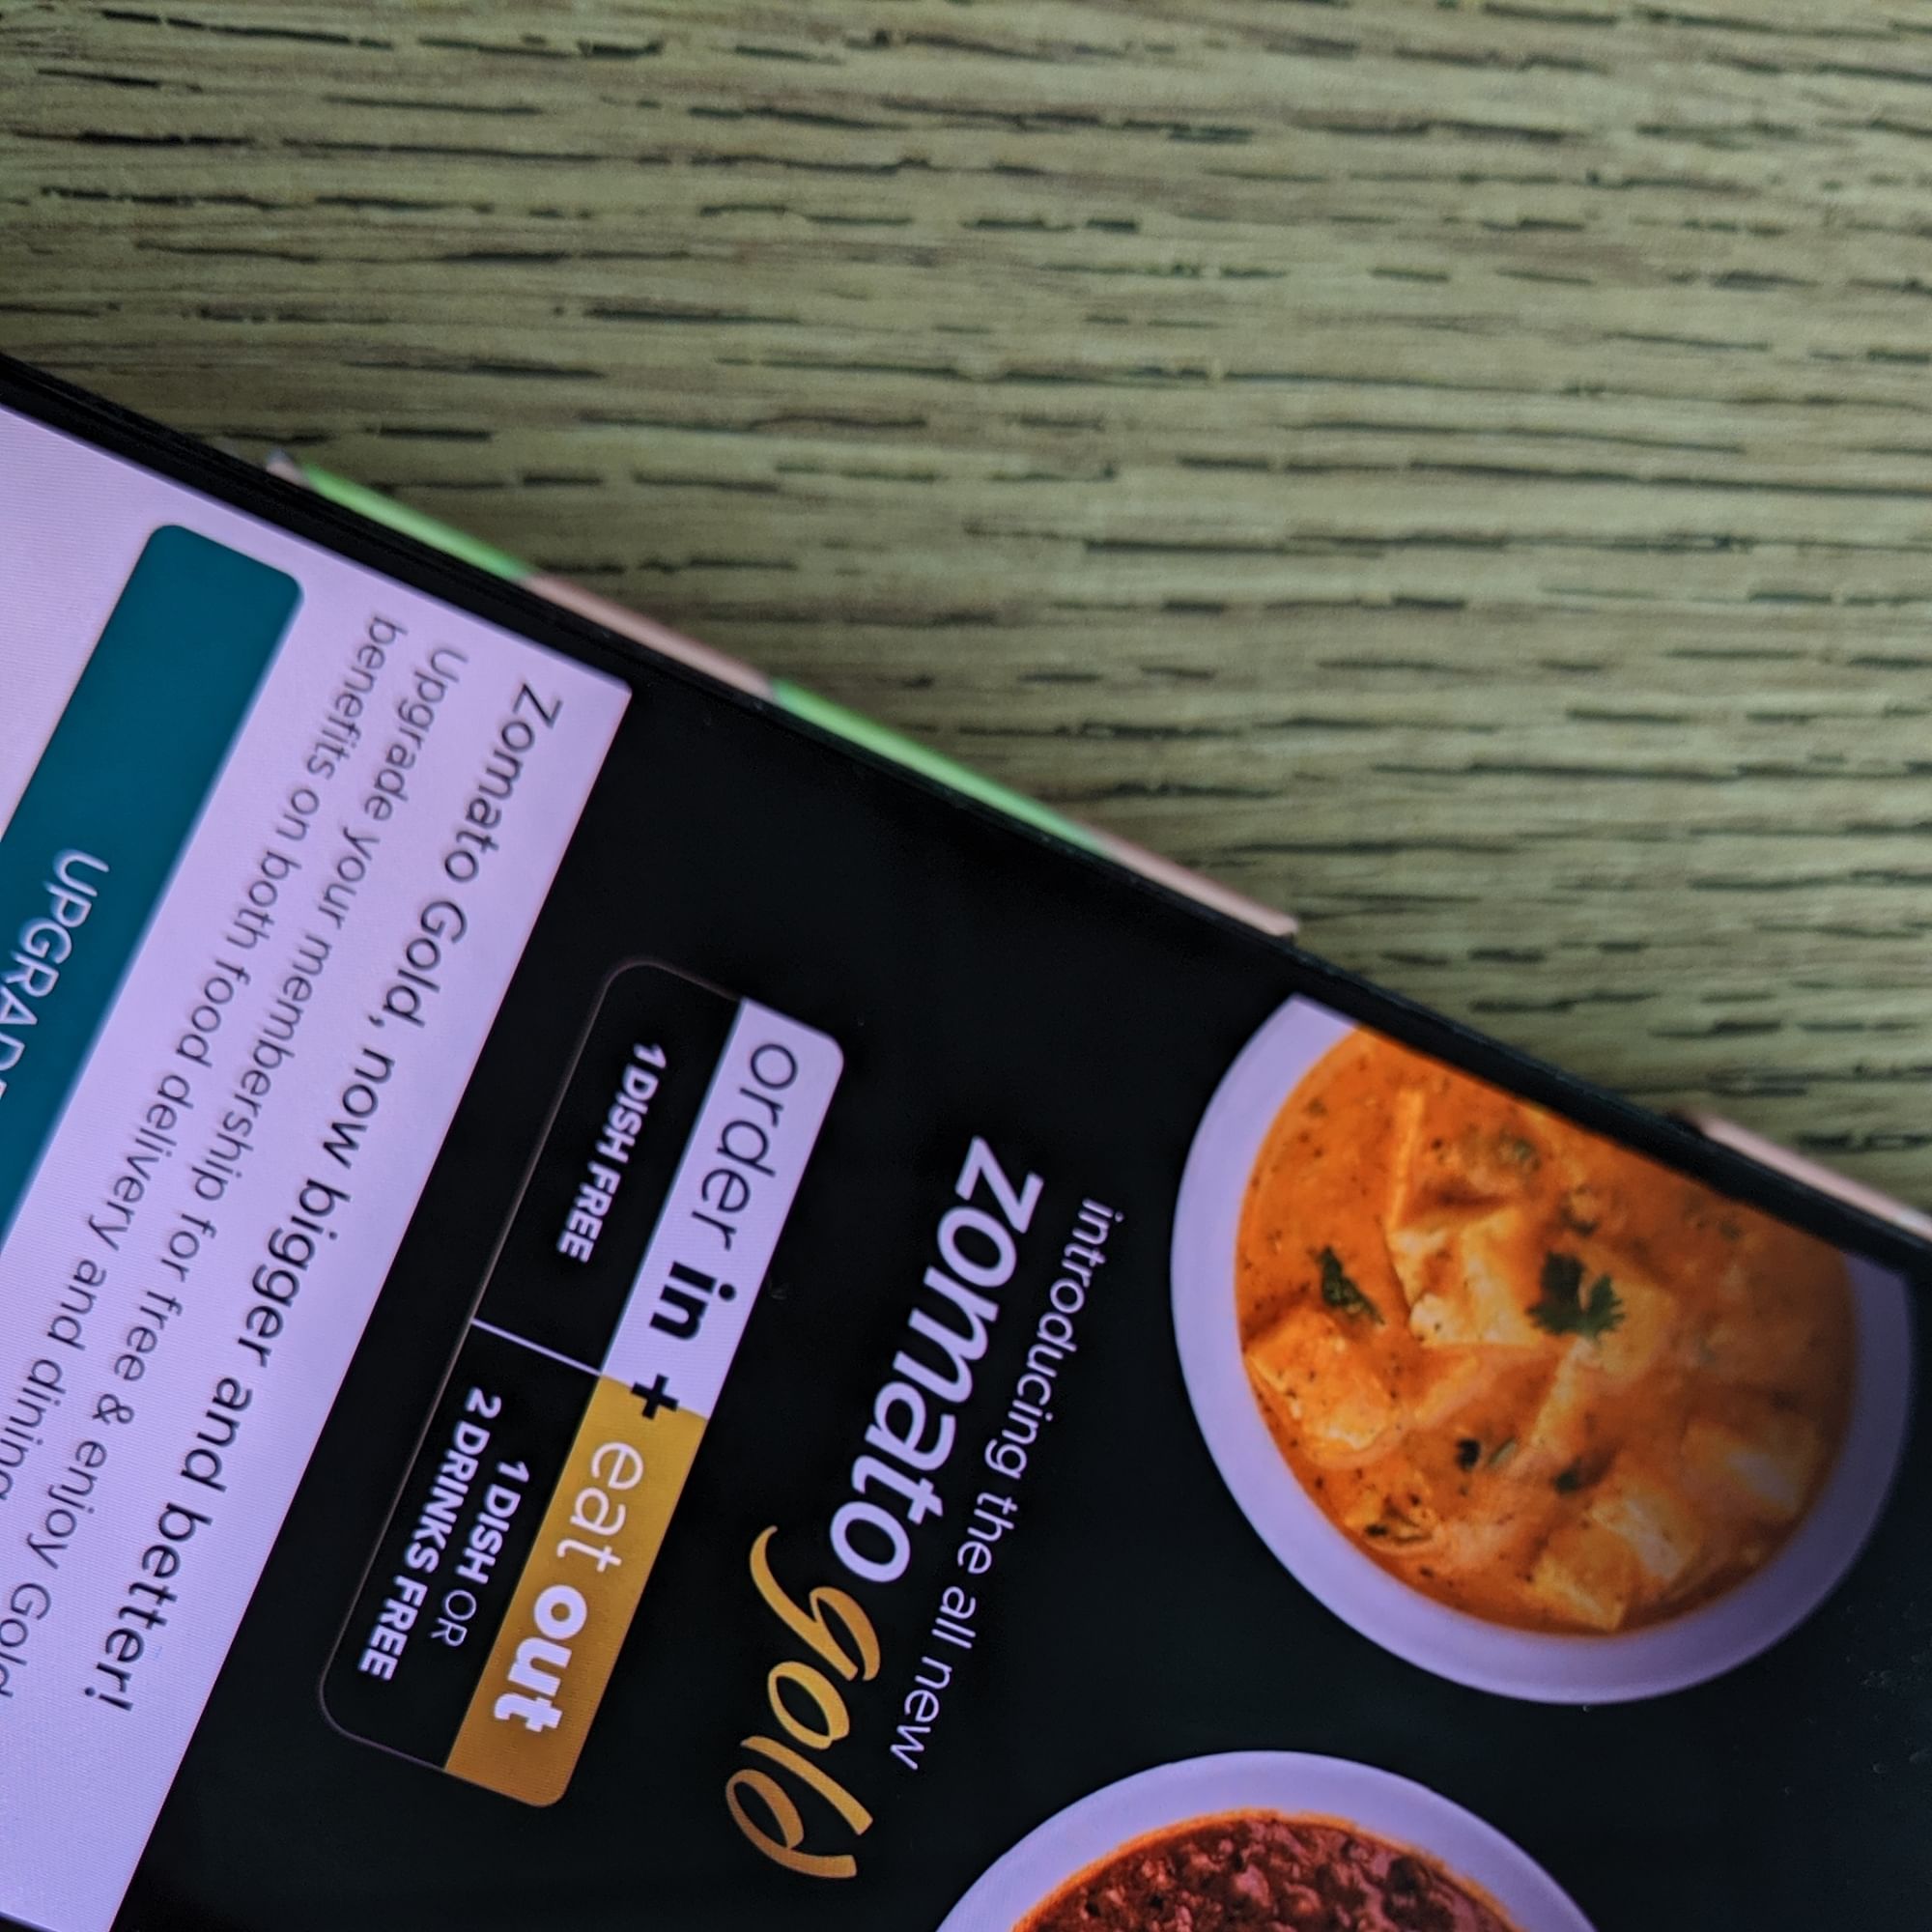 Zomato Gold is also available for food deliveries.